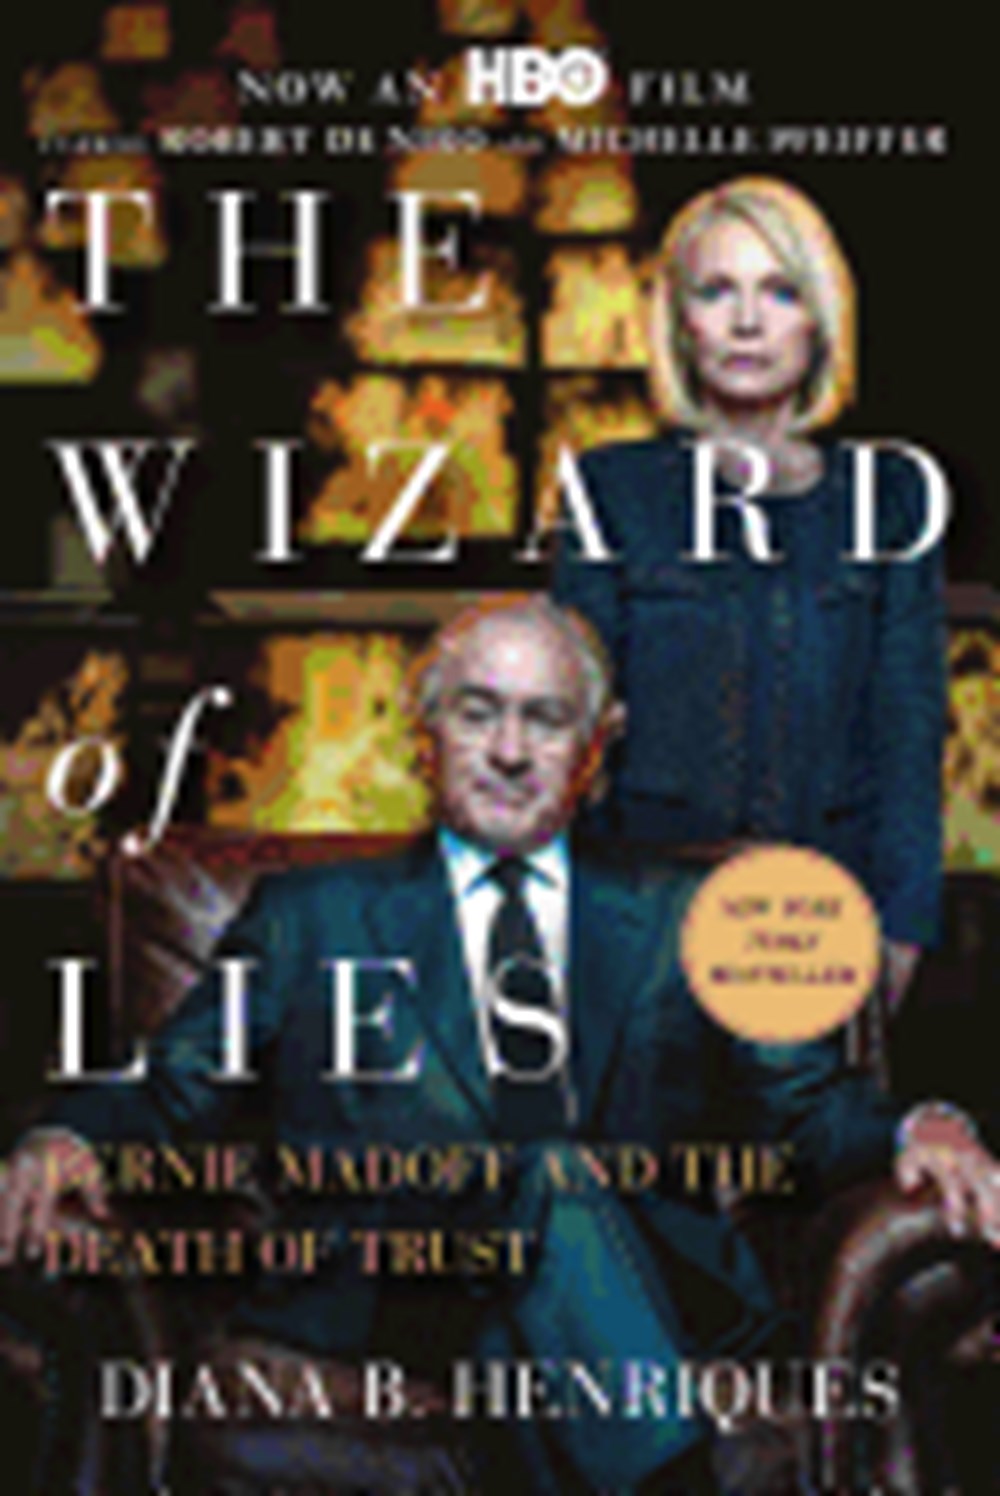 Wizard of Lies Bernie Madoff and the Death of Trust